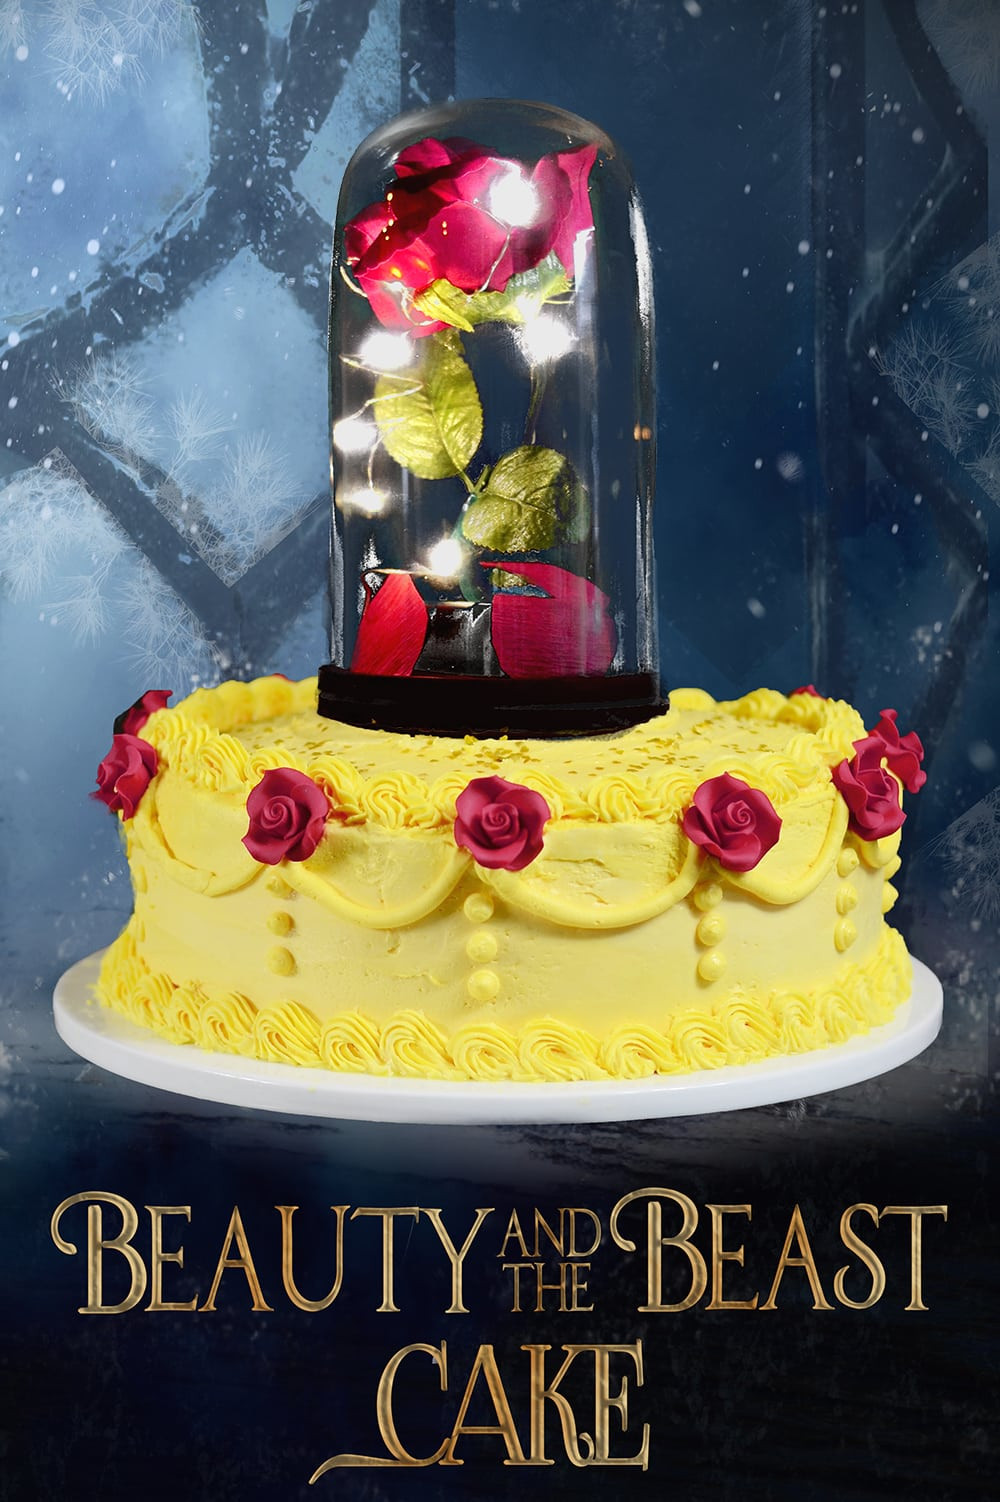 Beauty and the Beast Birthday Cake Luxury Beauty and the Beast Cake Video Tutorial ⋆ Sprinkle some Fun